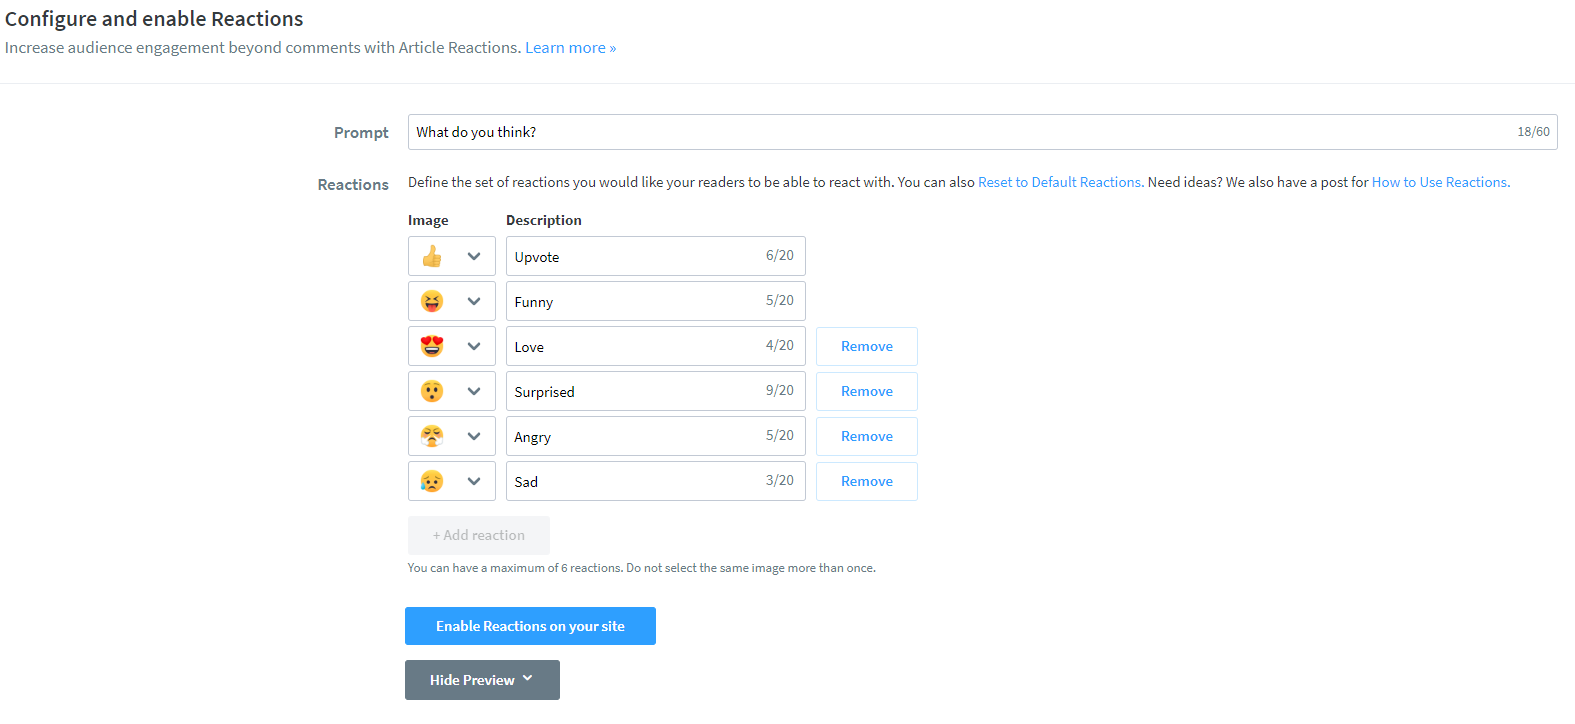 Screenshot of the configure and enable reactions page of the Disqus dashboard